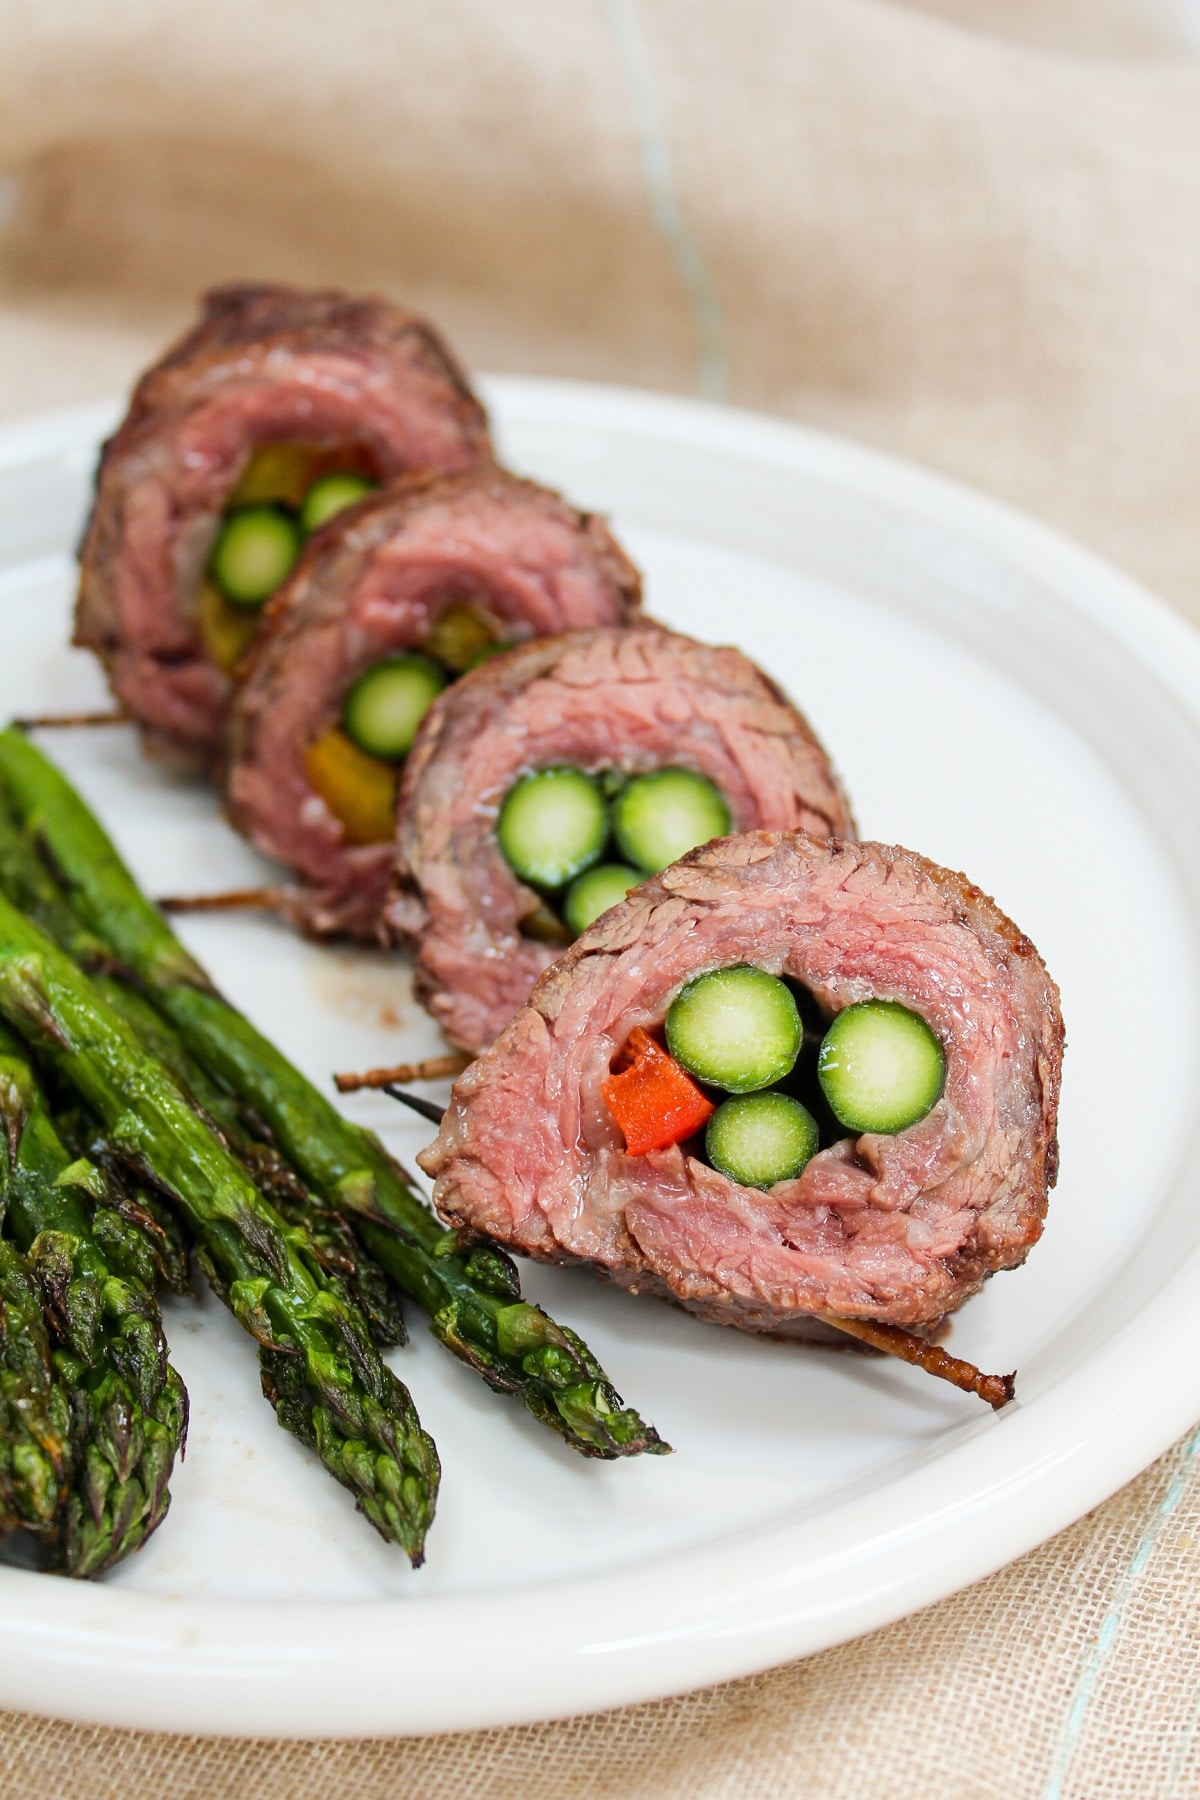 steak and asparagus roll-ups sliced on a plate